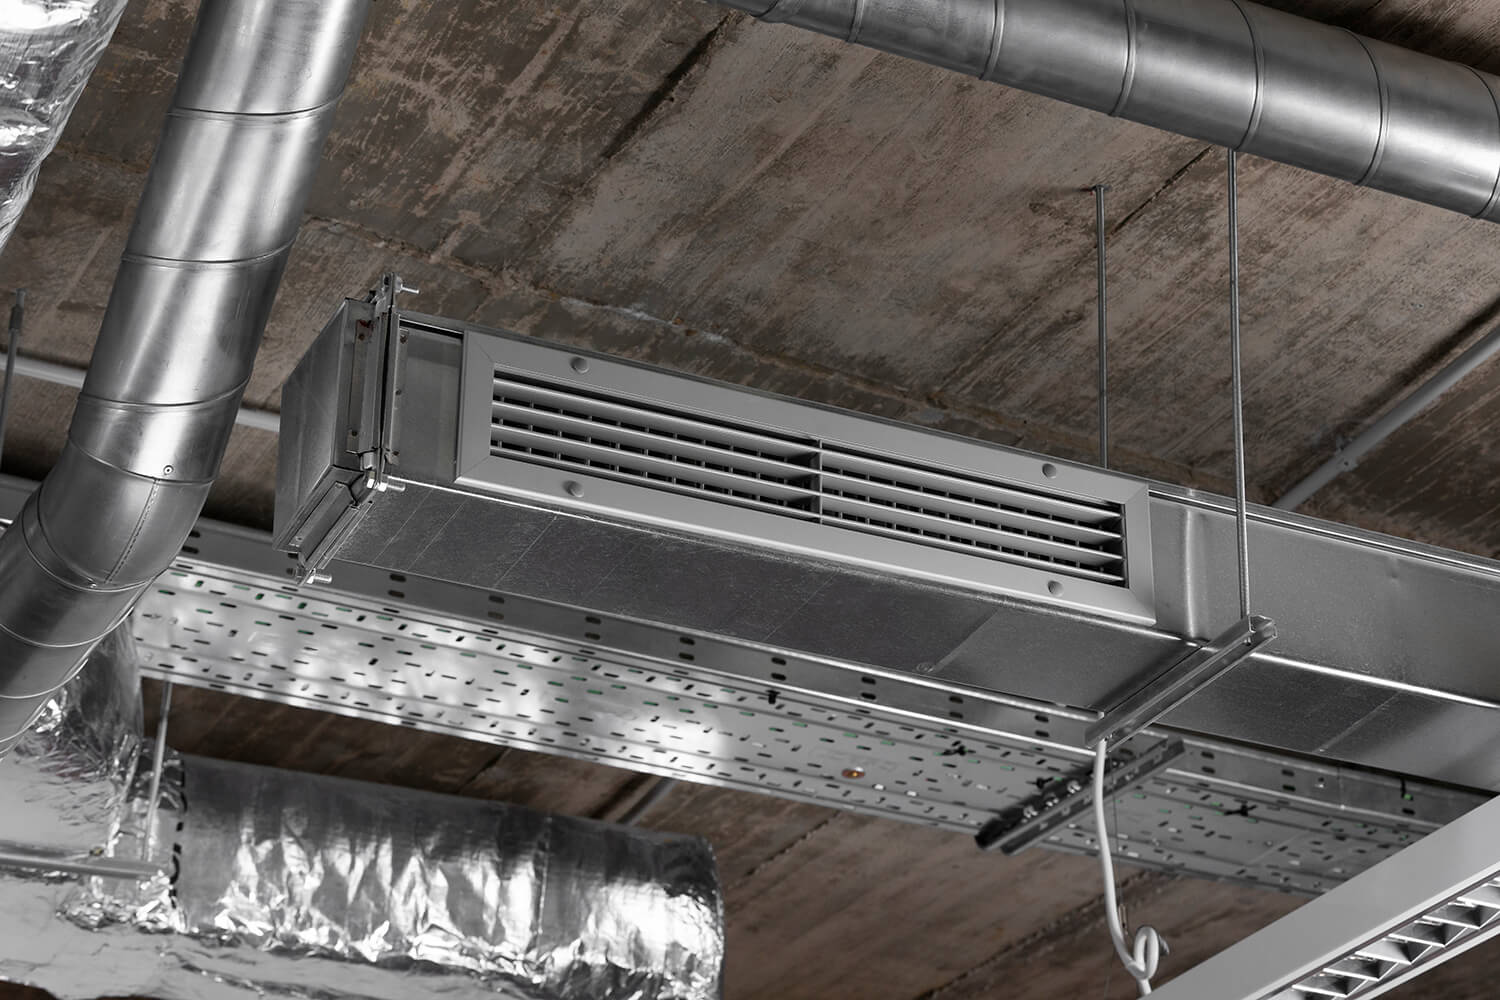 Worst sites for air conditioning to stop working